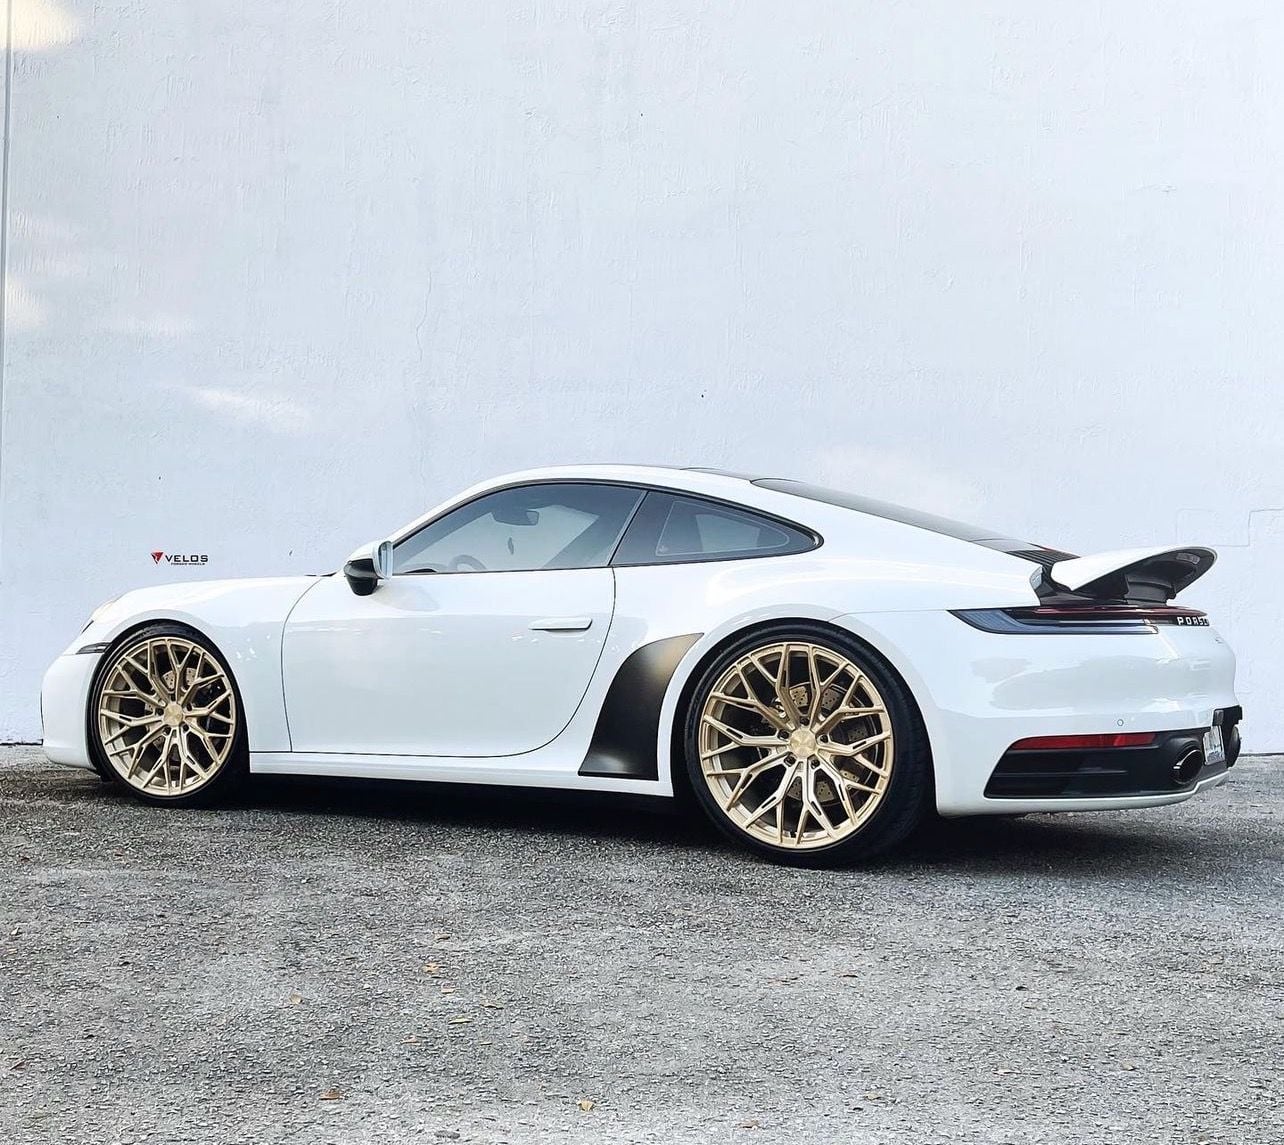 Wheels and Tires/Axles - New Porsche 911 Wheels with Gold Rims - New - 2023 to 2024 Porsche 911 - Tampa, FL 33606, United States